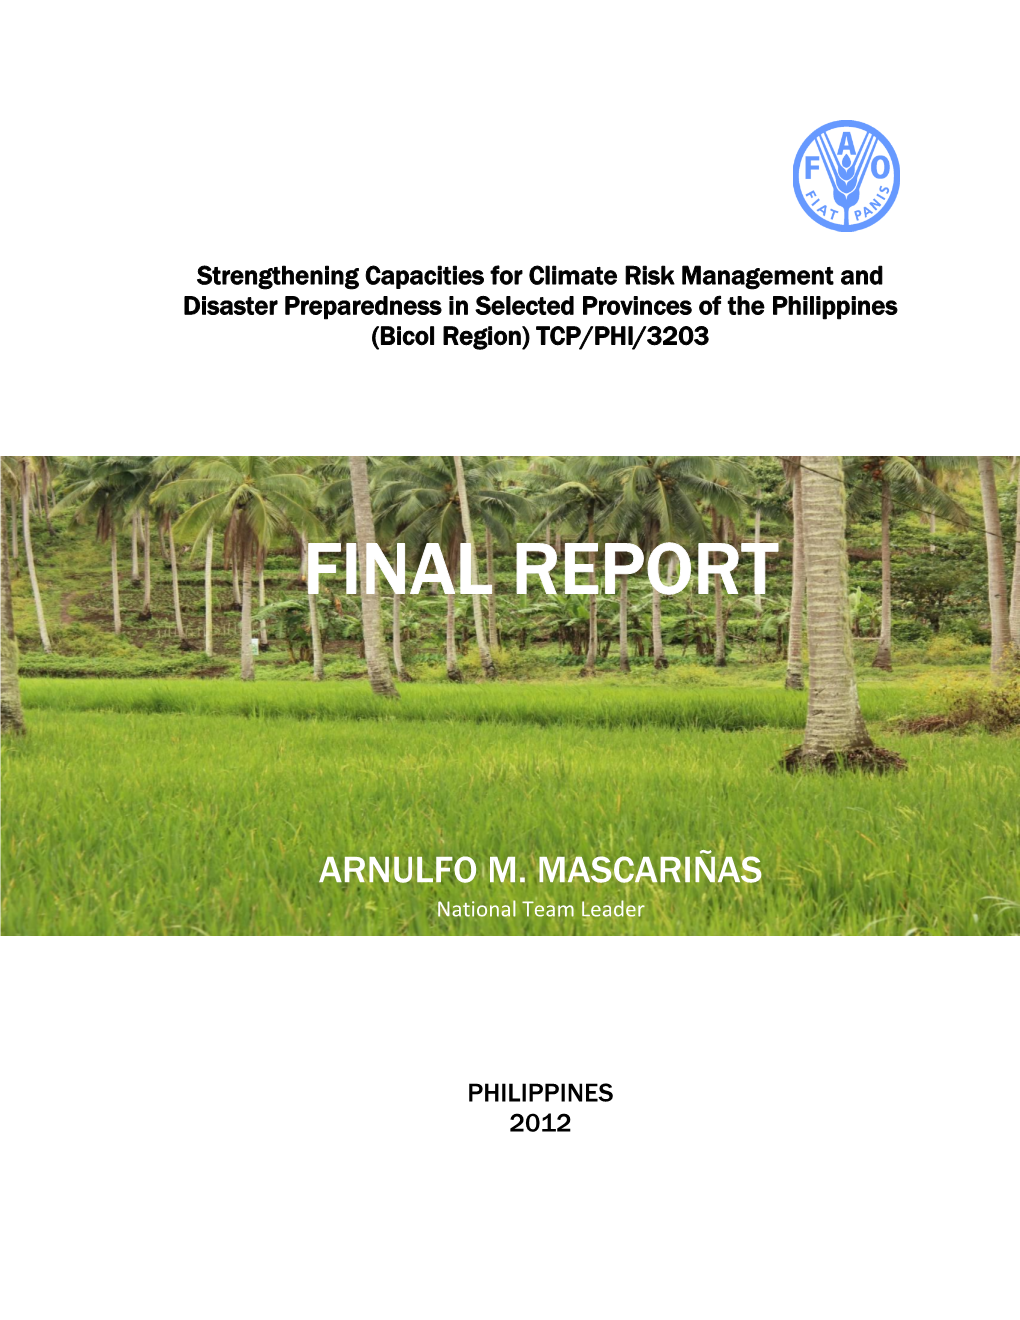 Strengthening Capacities for Climate Risk Management and Disaster Preparedness in Selected Provinces of the Philippines (Bicol Region) TCP/PHI/3203